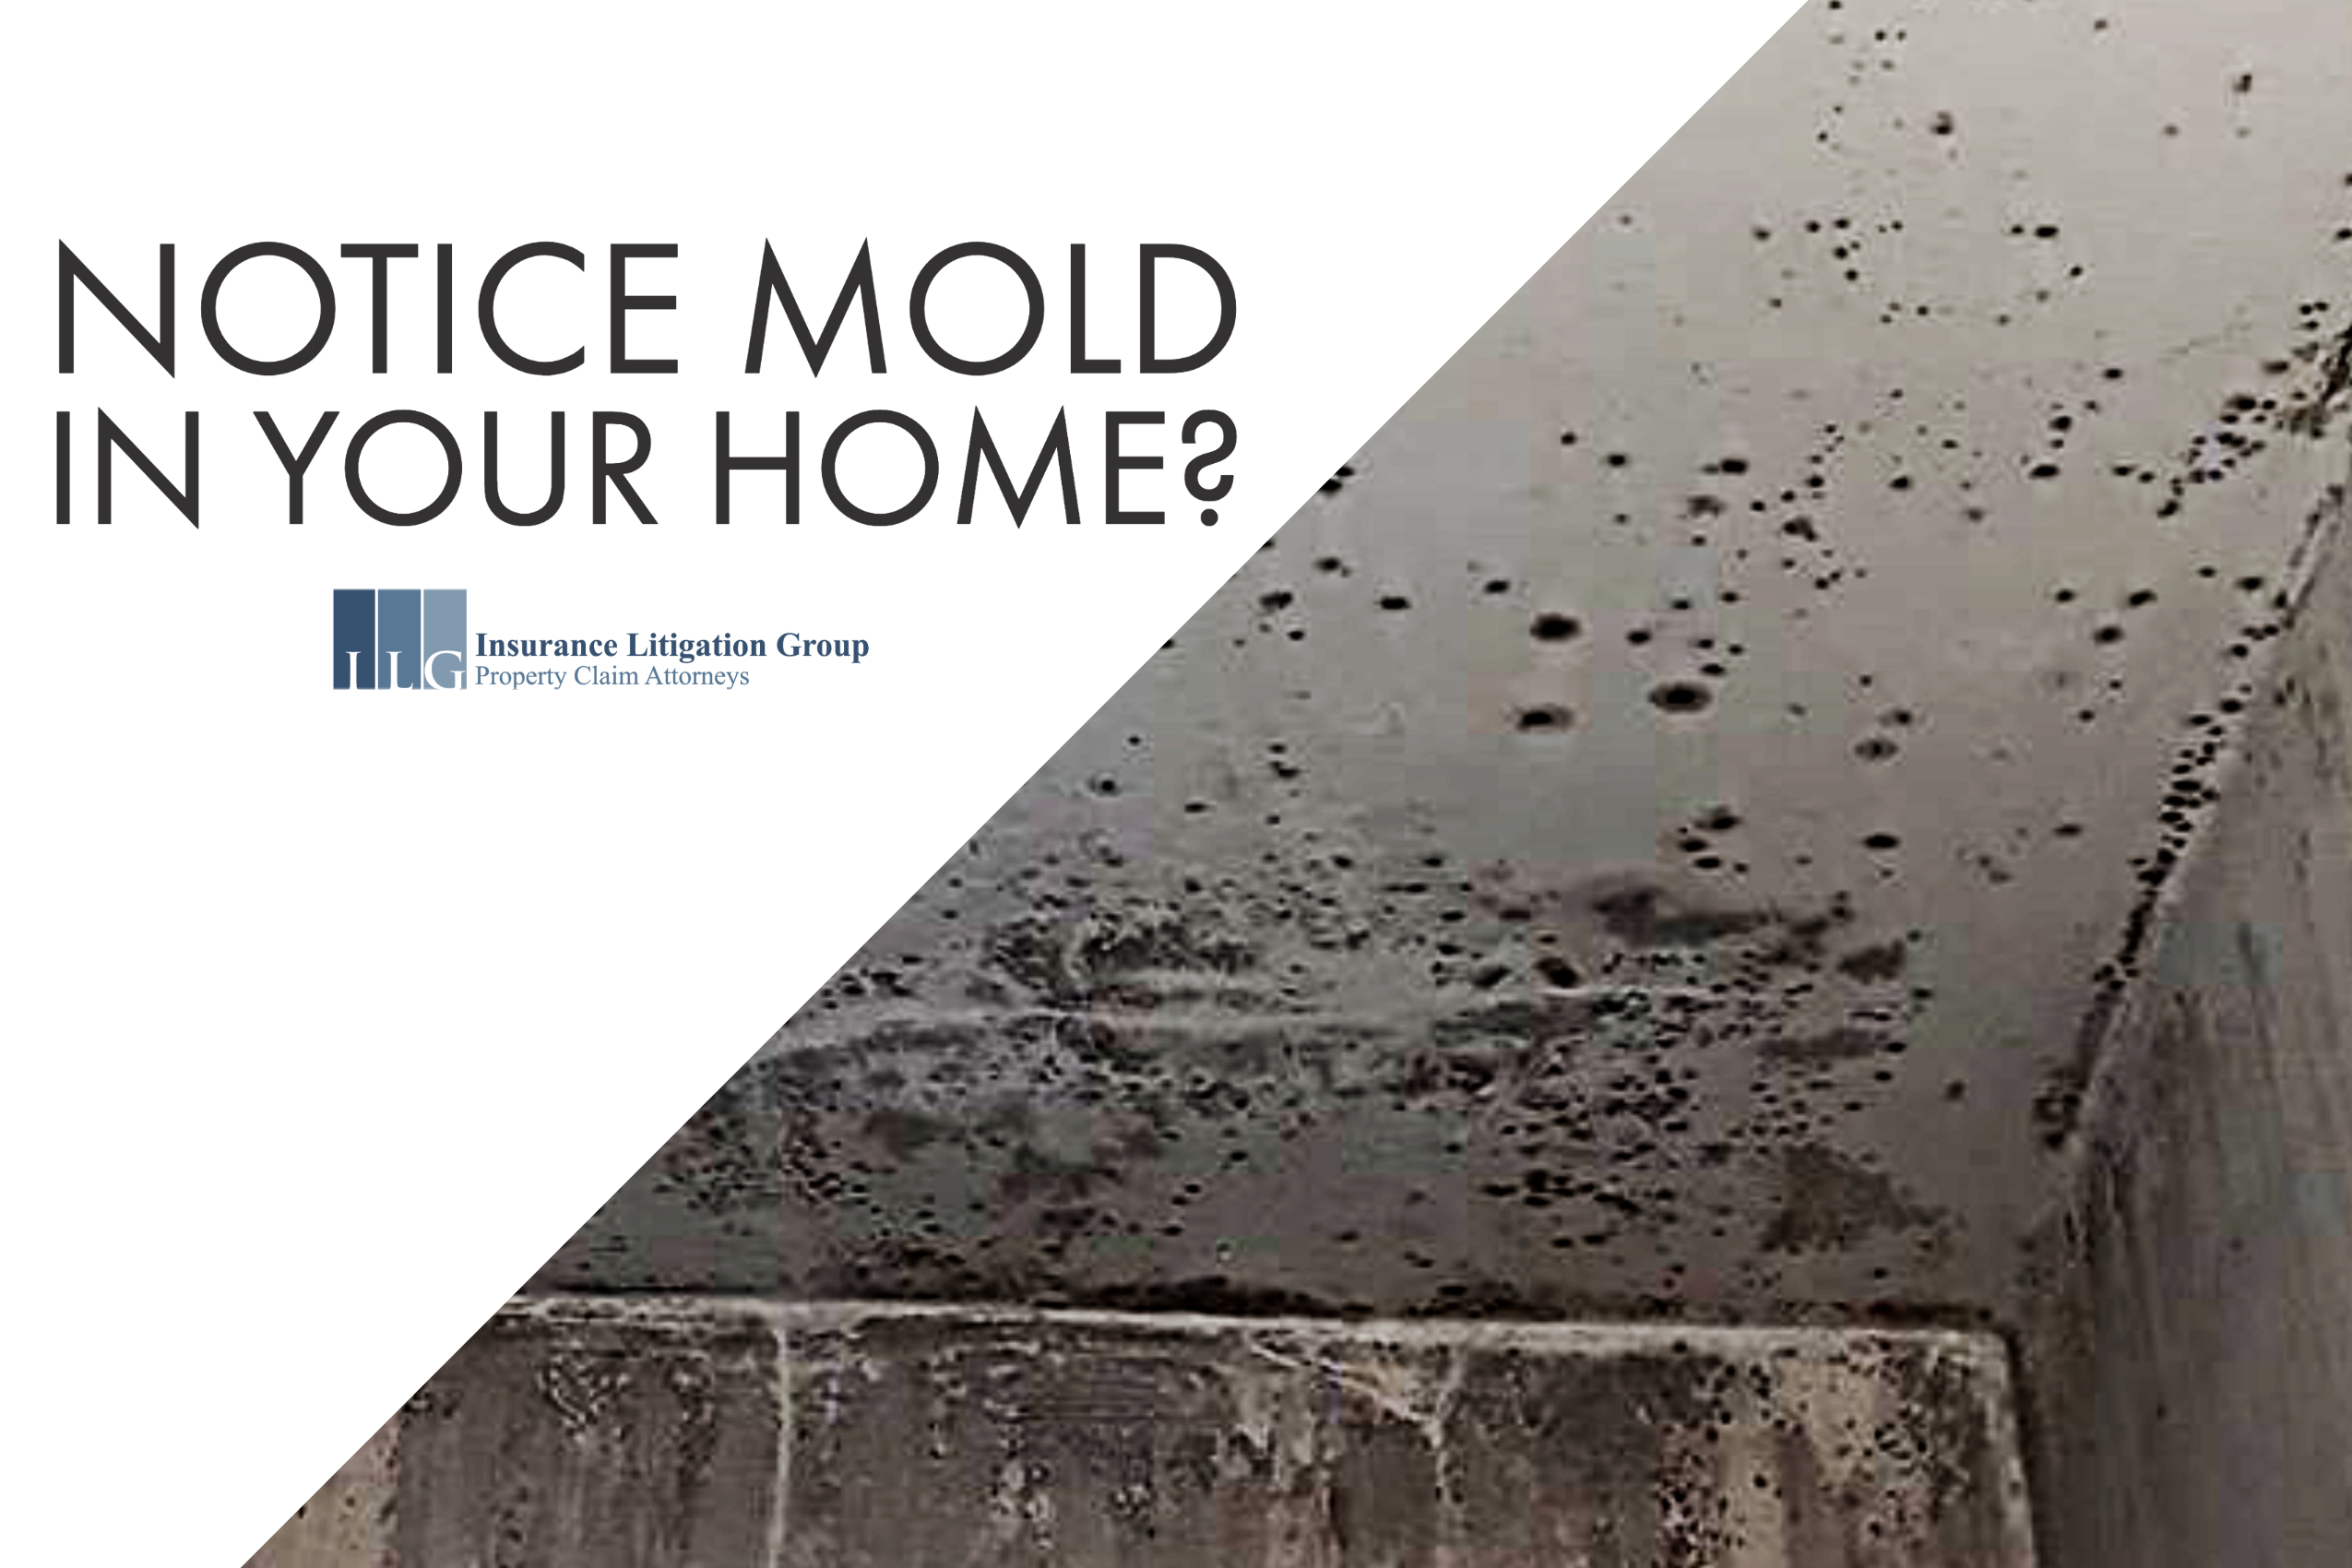 Notice Mold in Your Home? Here’s What You Need To Know